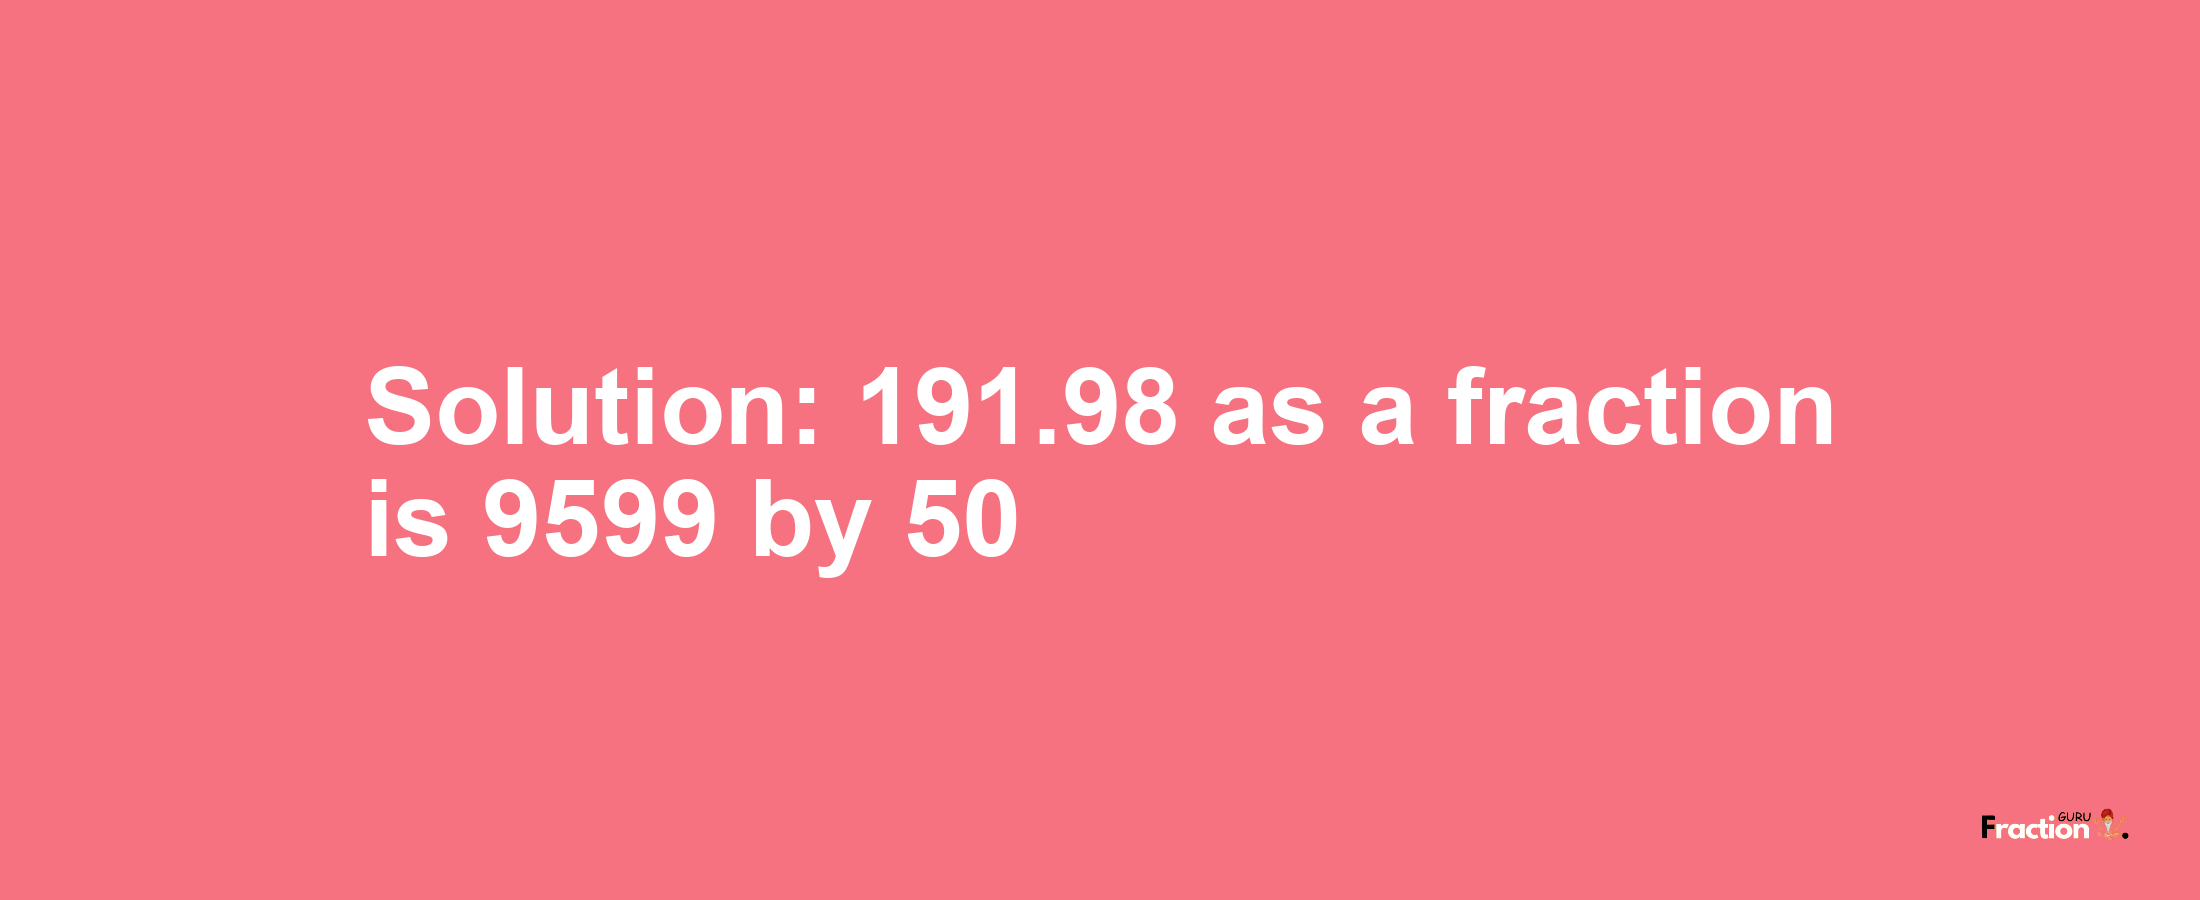 Solution:191.98 as a fraction is 9599/50